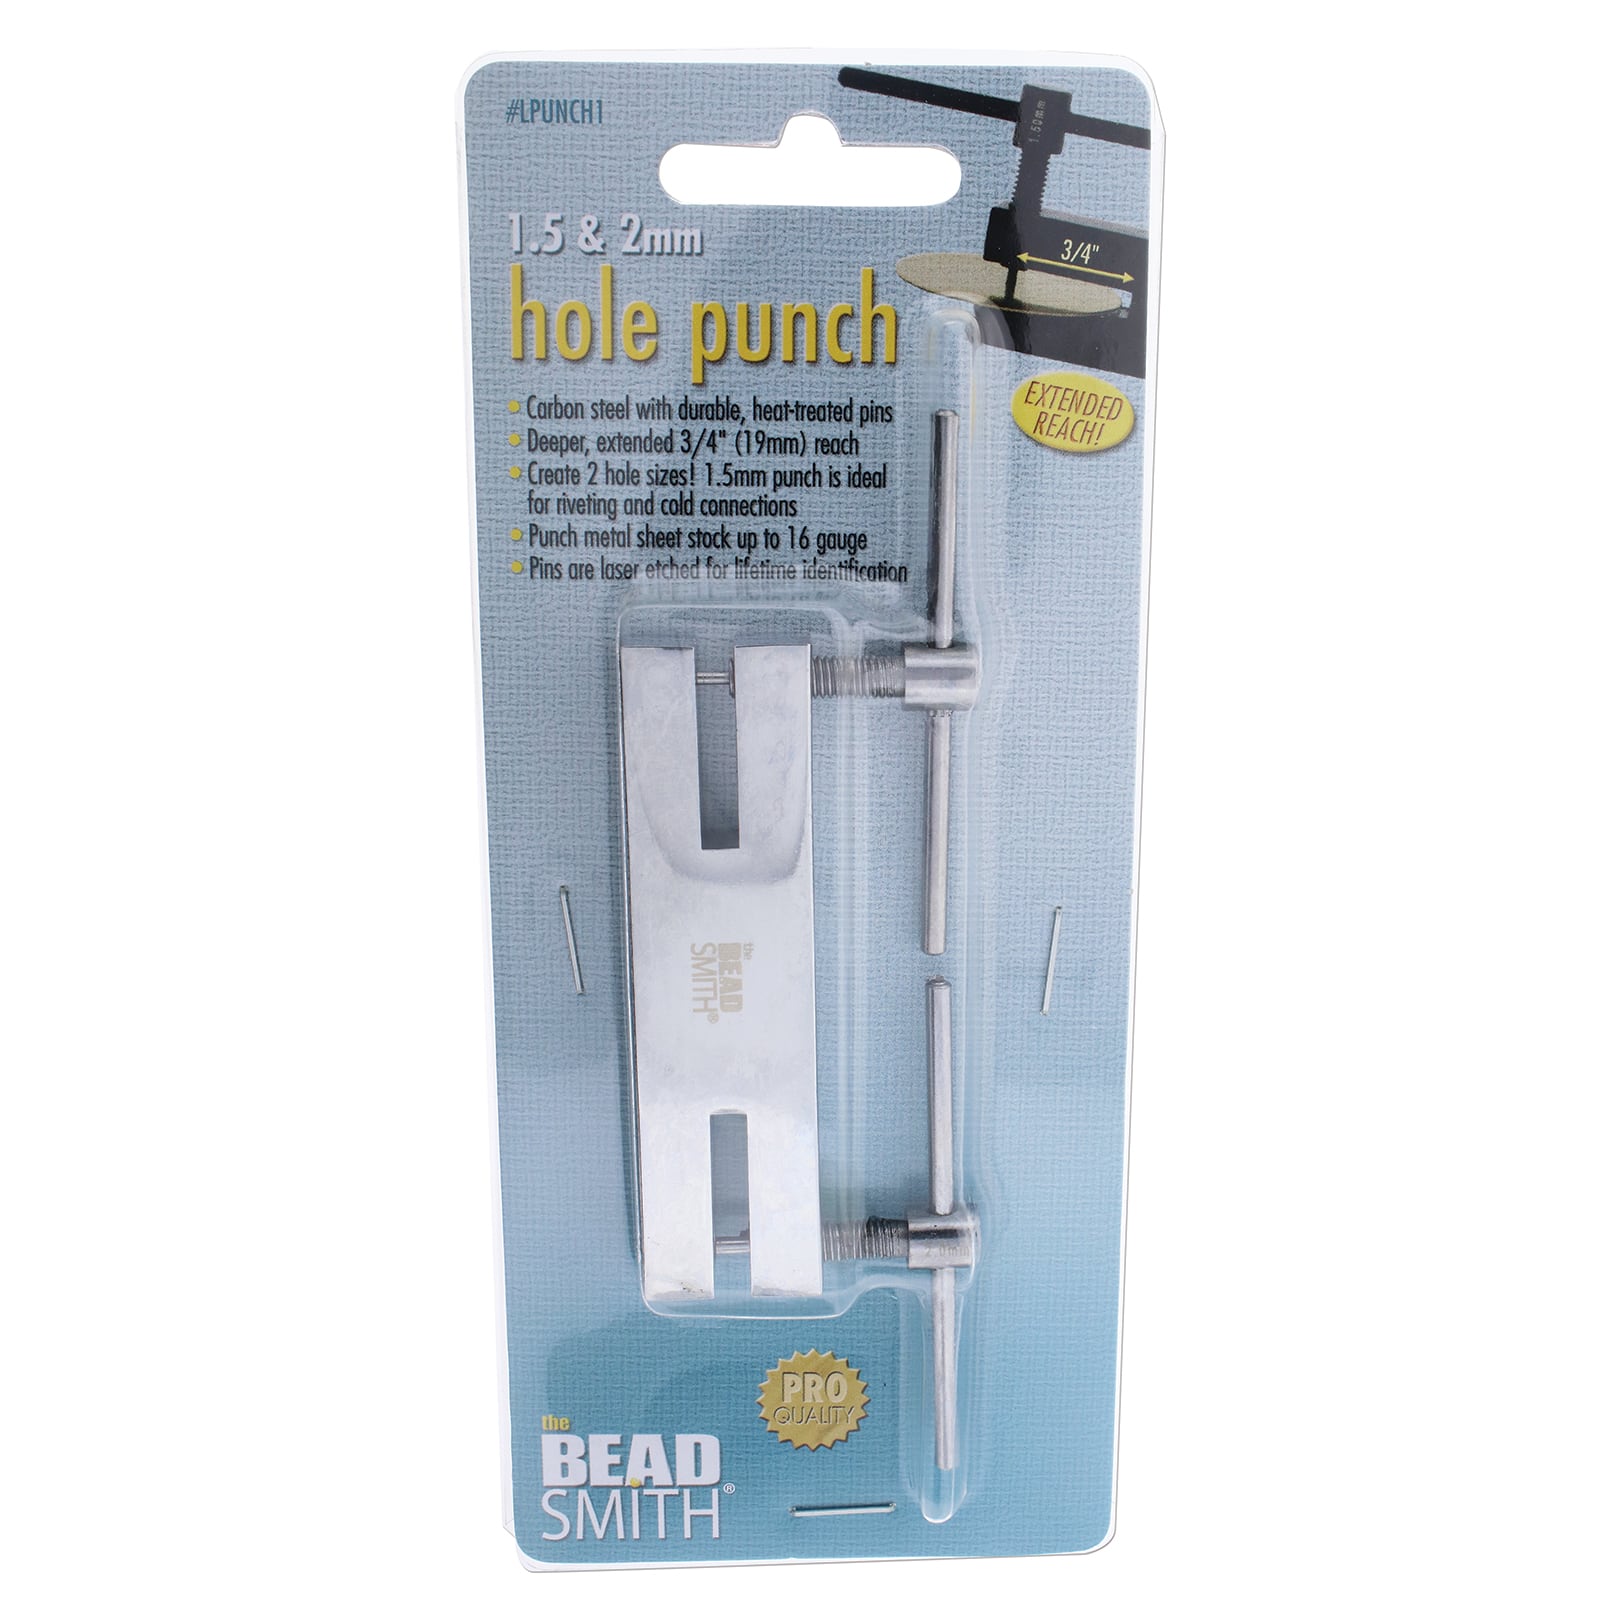 Beadsmith&#xAE; Double Metal Punch, 1.5mm &#x26; 2mm           